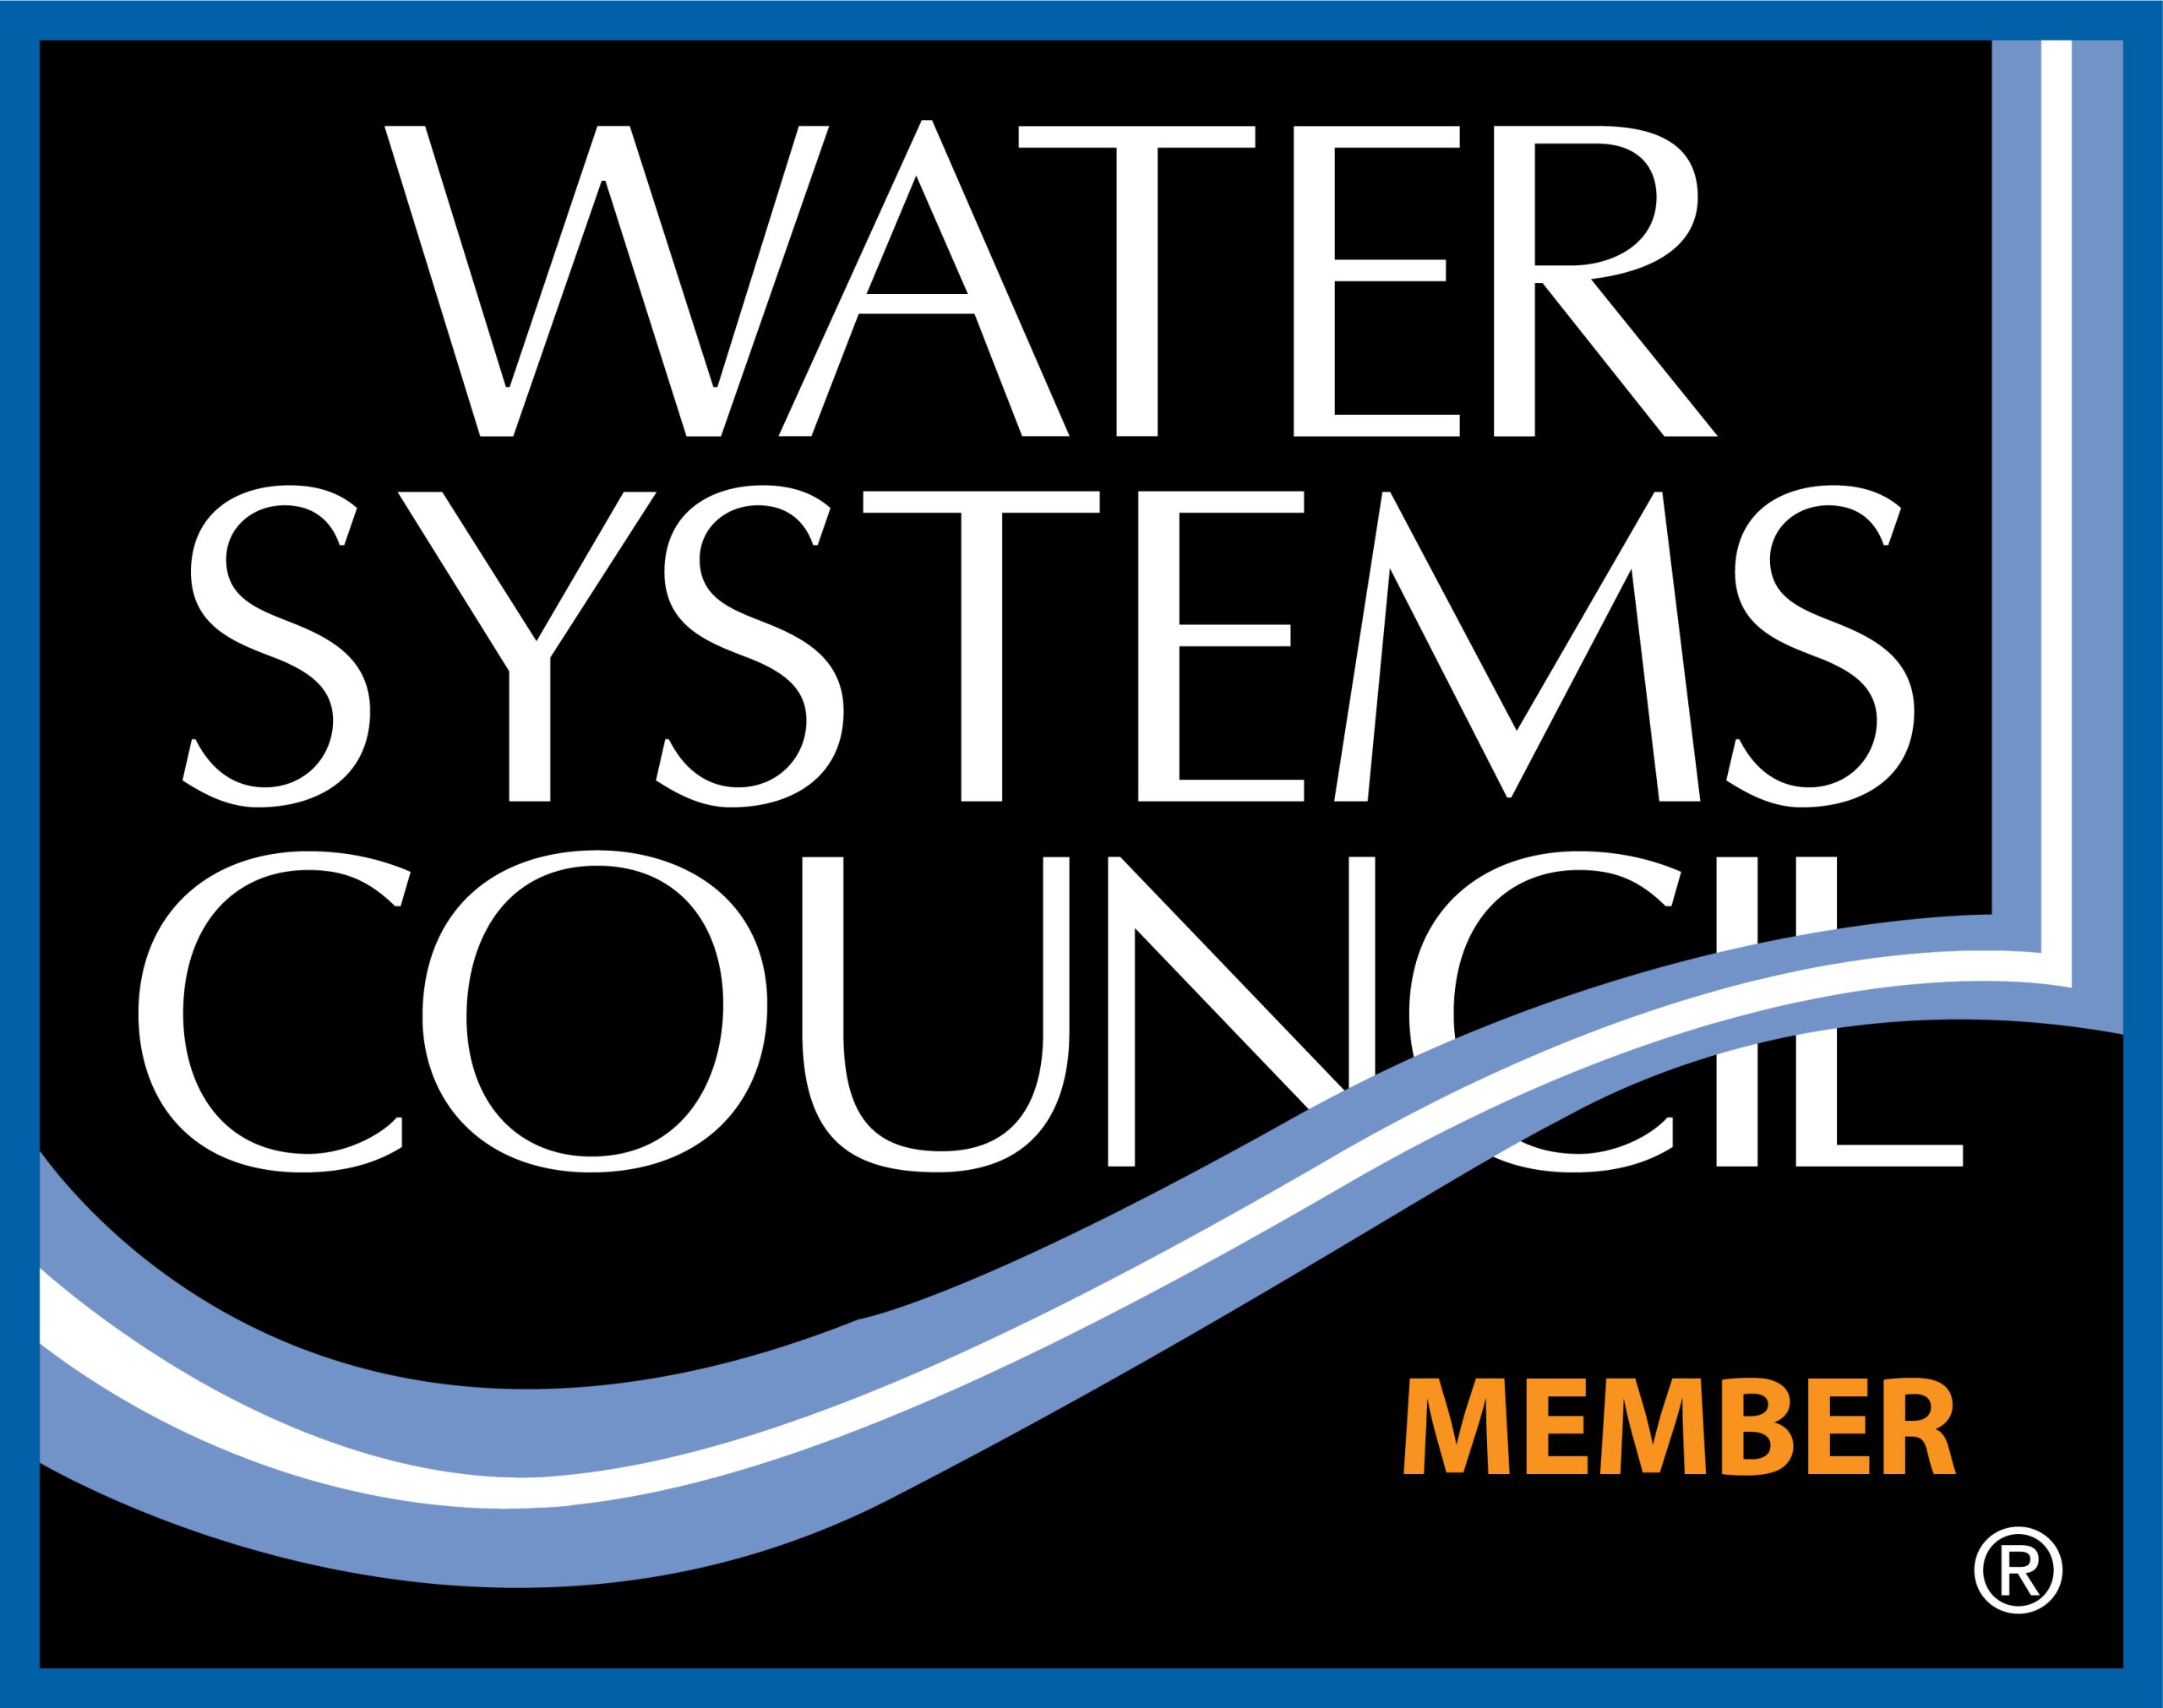 Water Systems Council - Greco and Haines